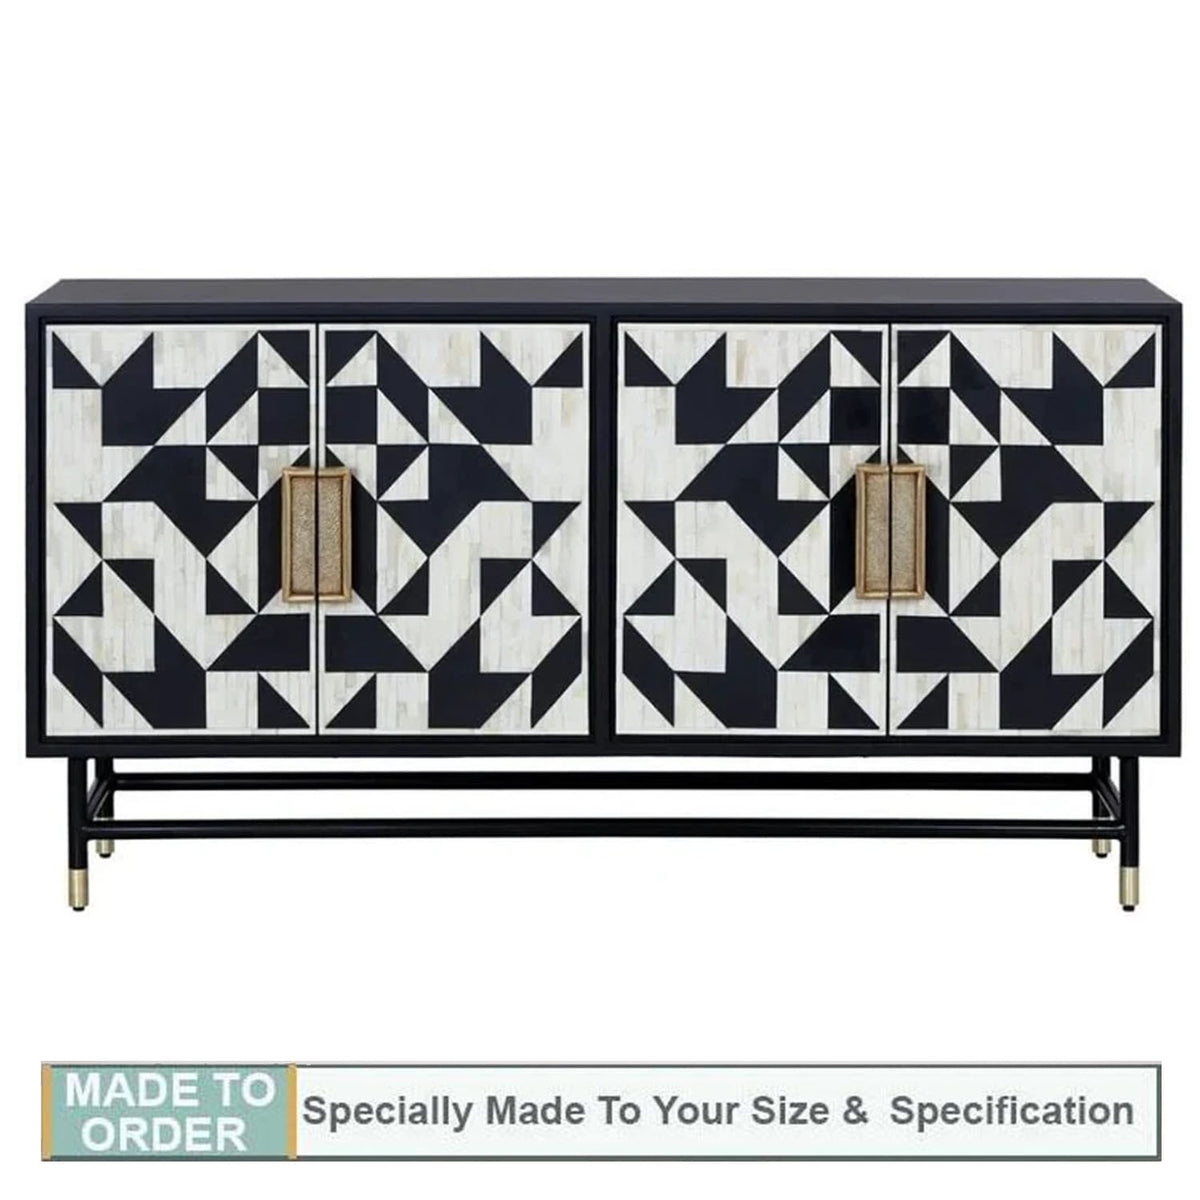 Bone Inlay Chest of 8 Drawer Black White Honeycomb Pattern Commode Sideboard handCrafted Home Decor Inlay Furniture by Bright Handicrafts - Notbrand